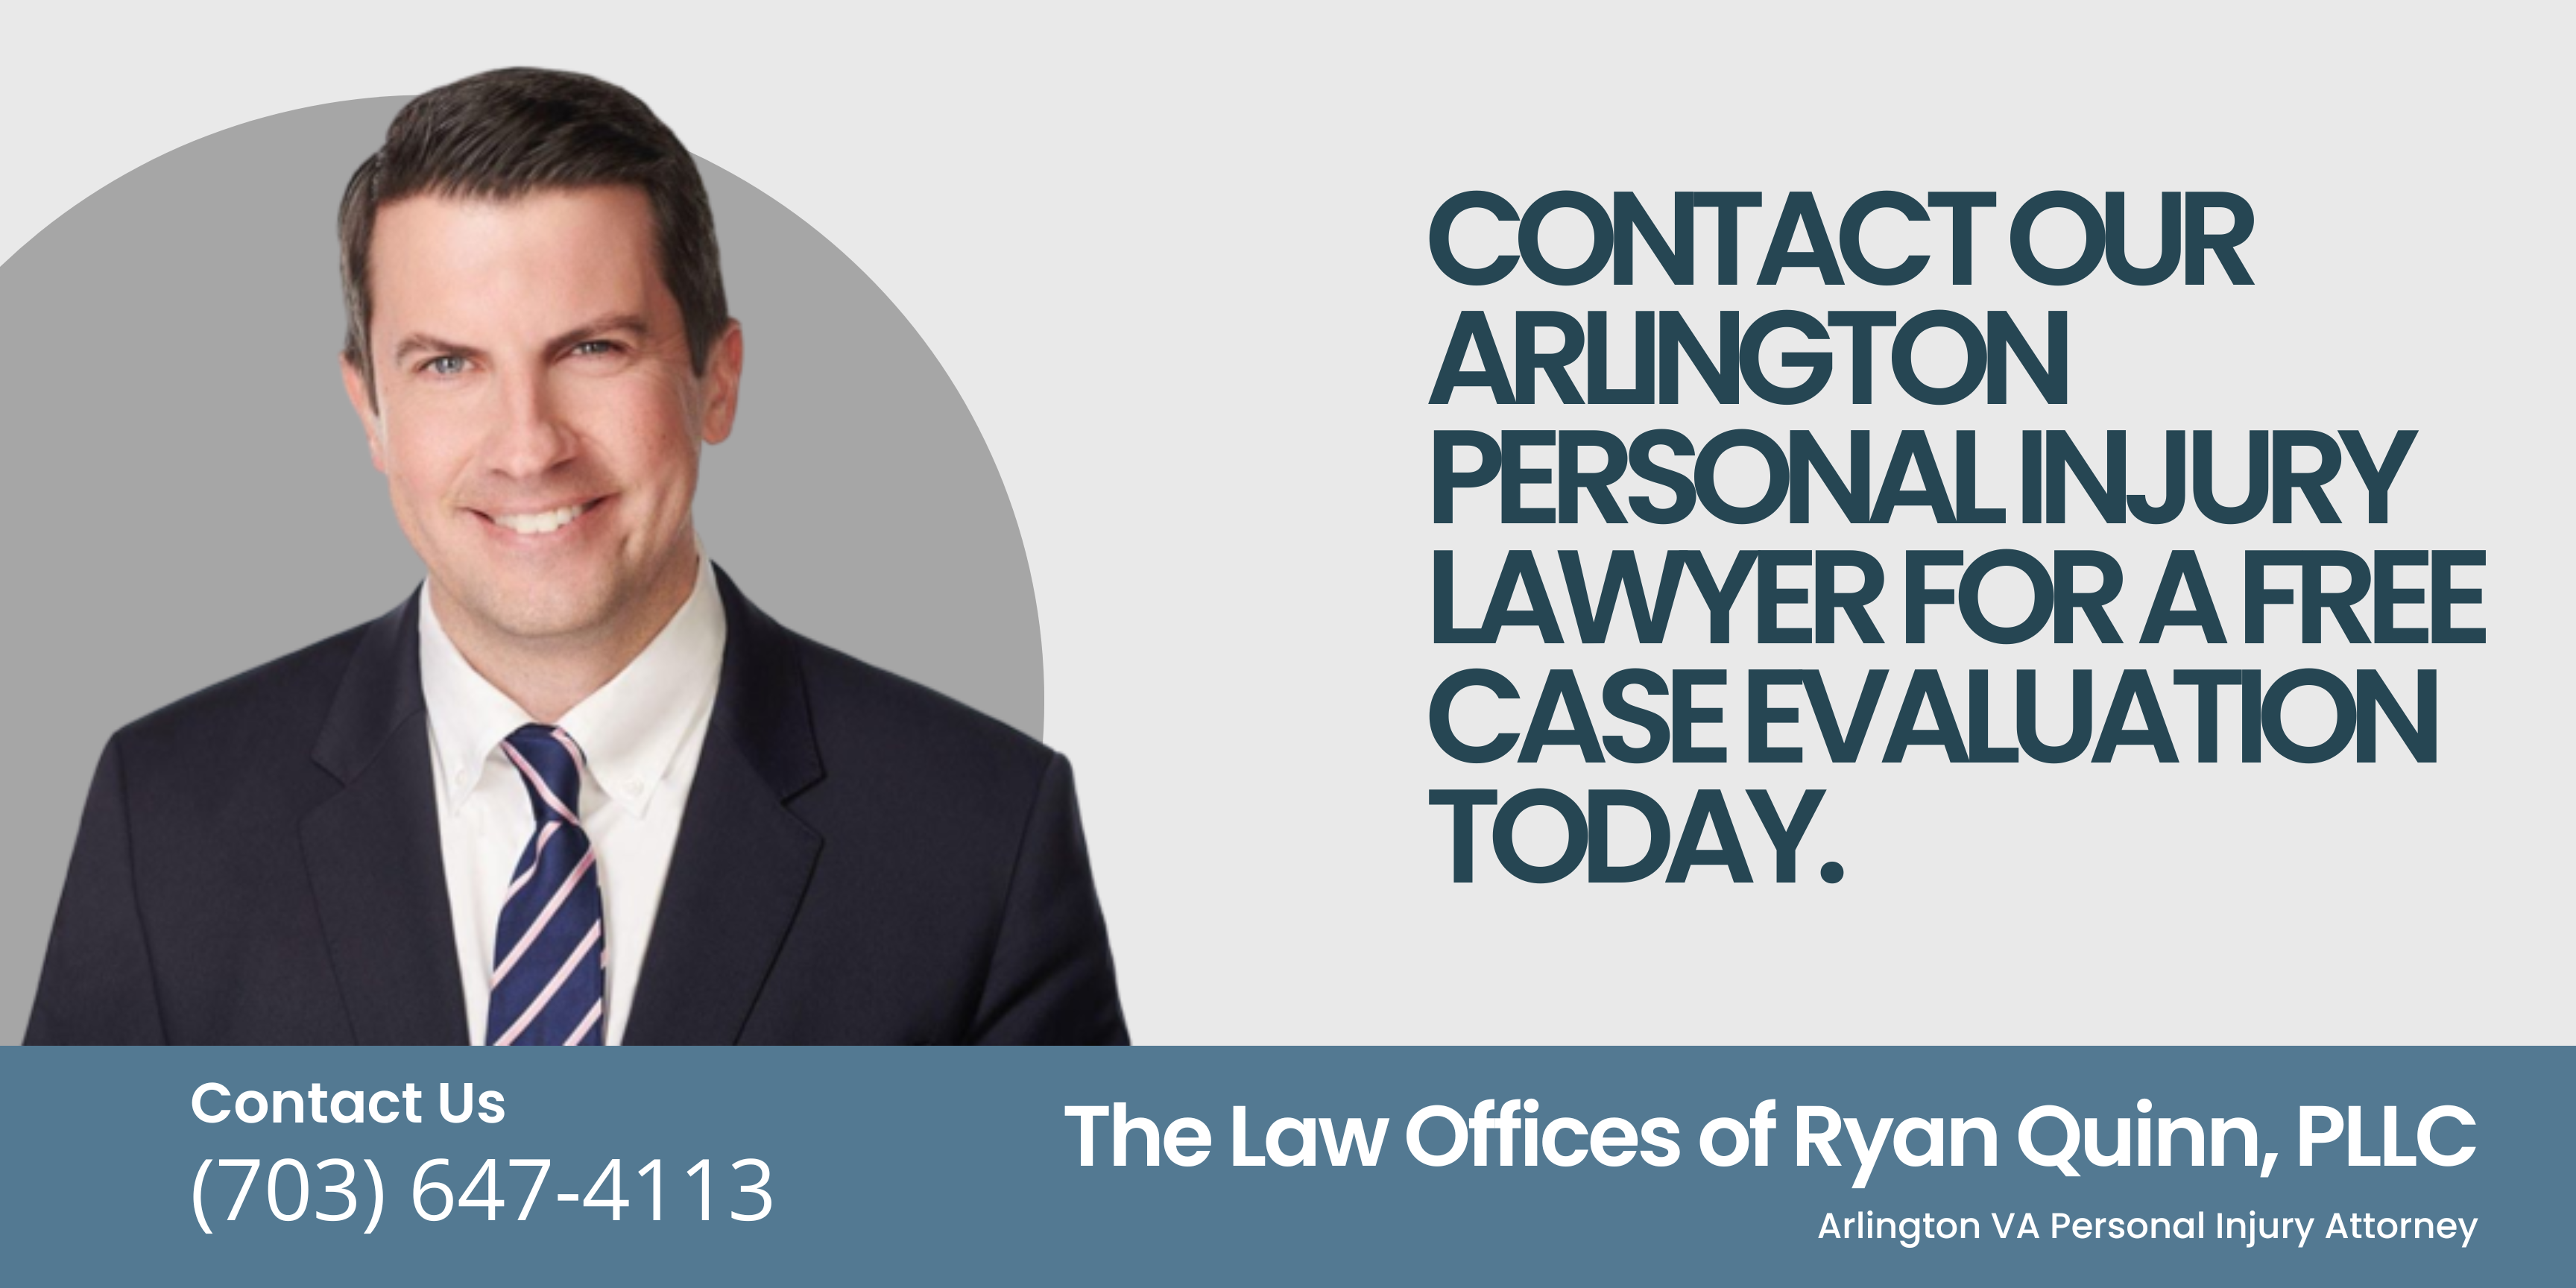 Contact our Arlington Personal Injury Lawyer